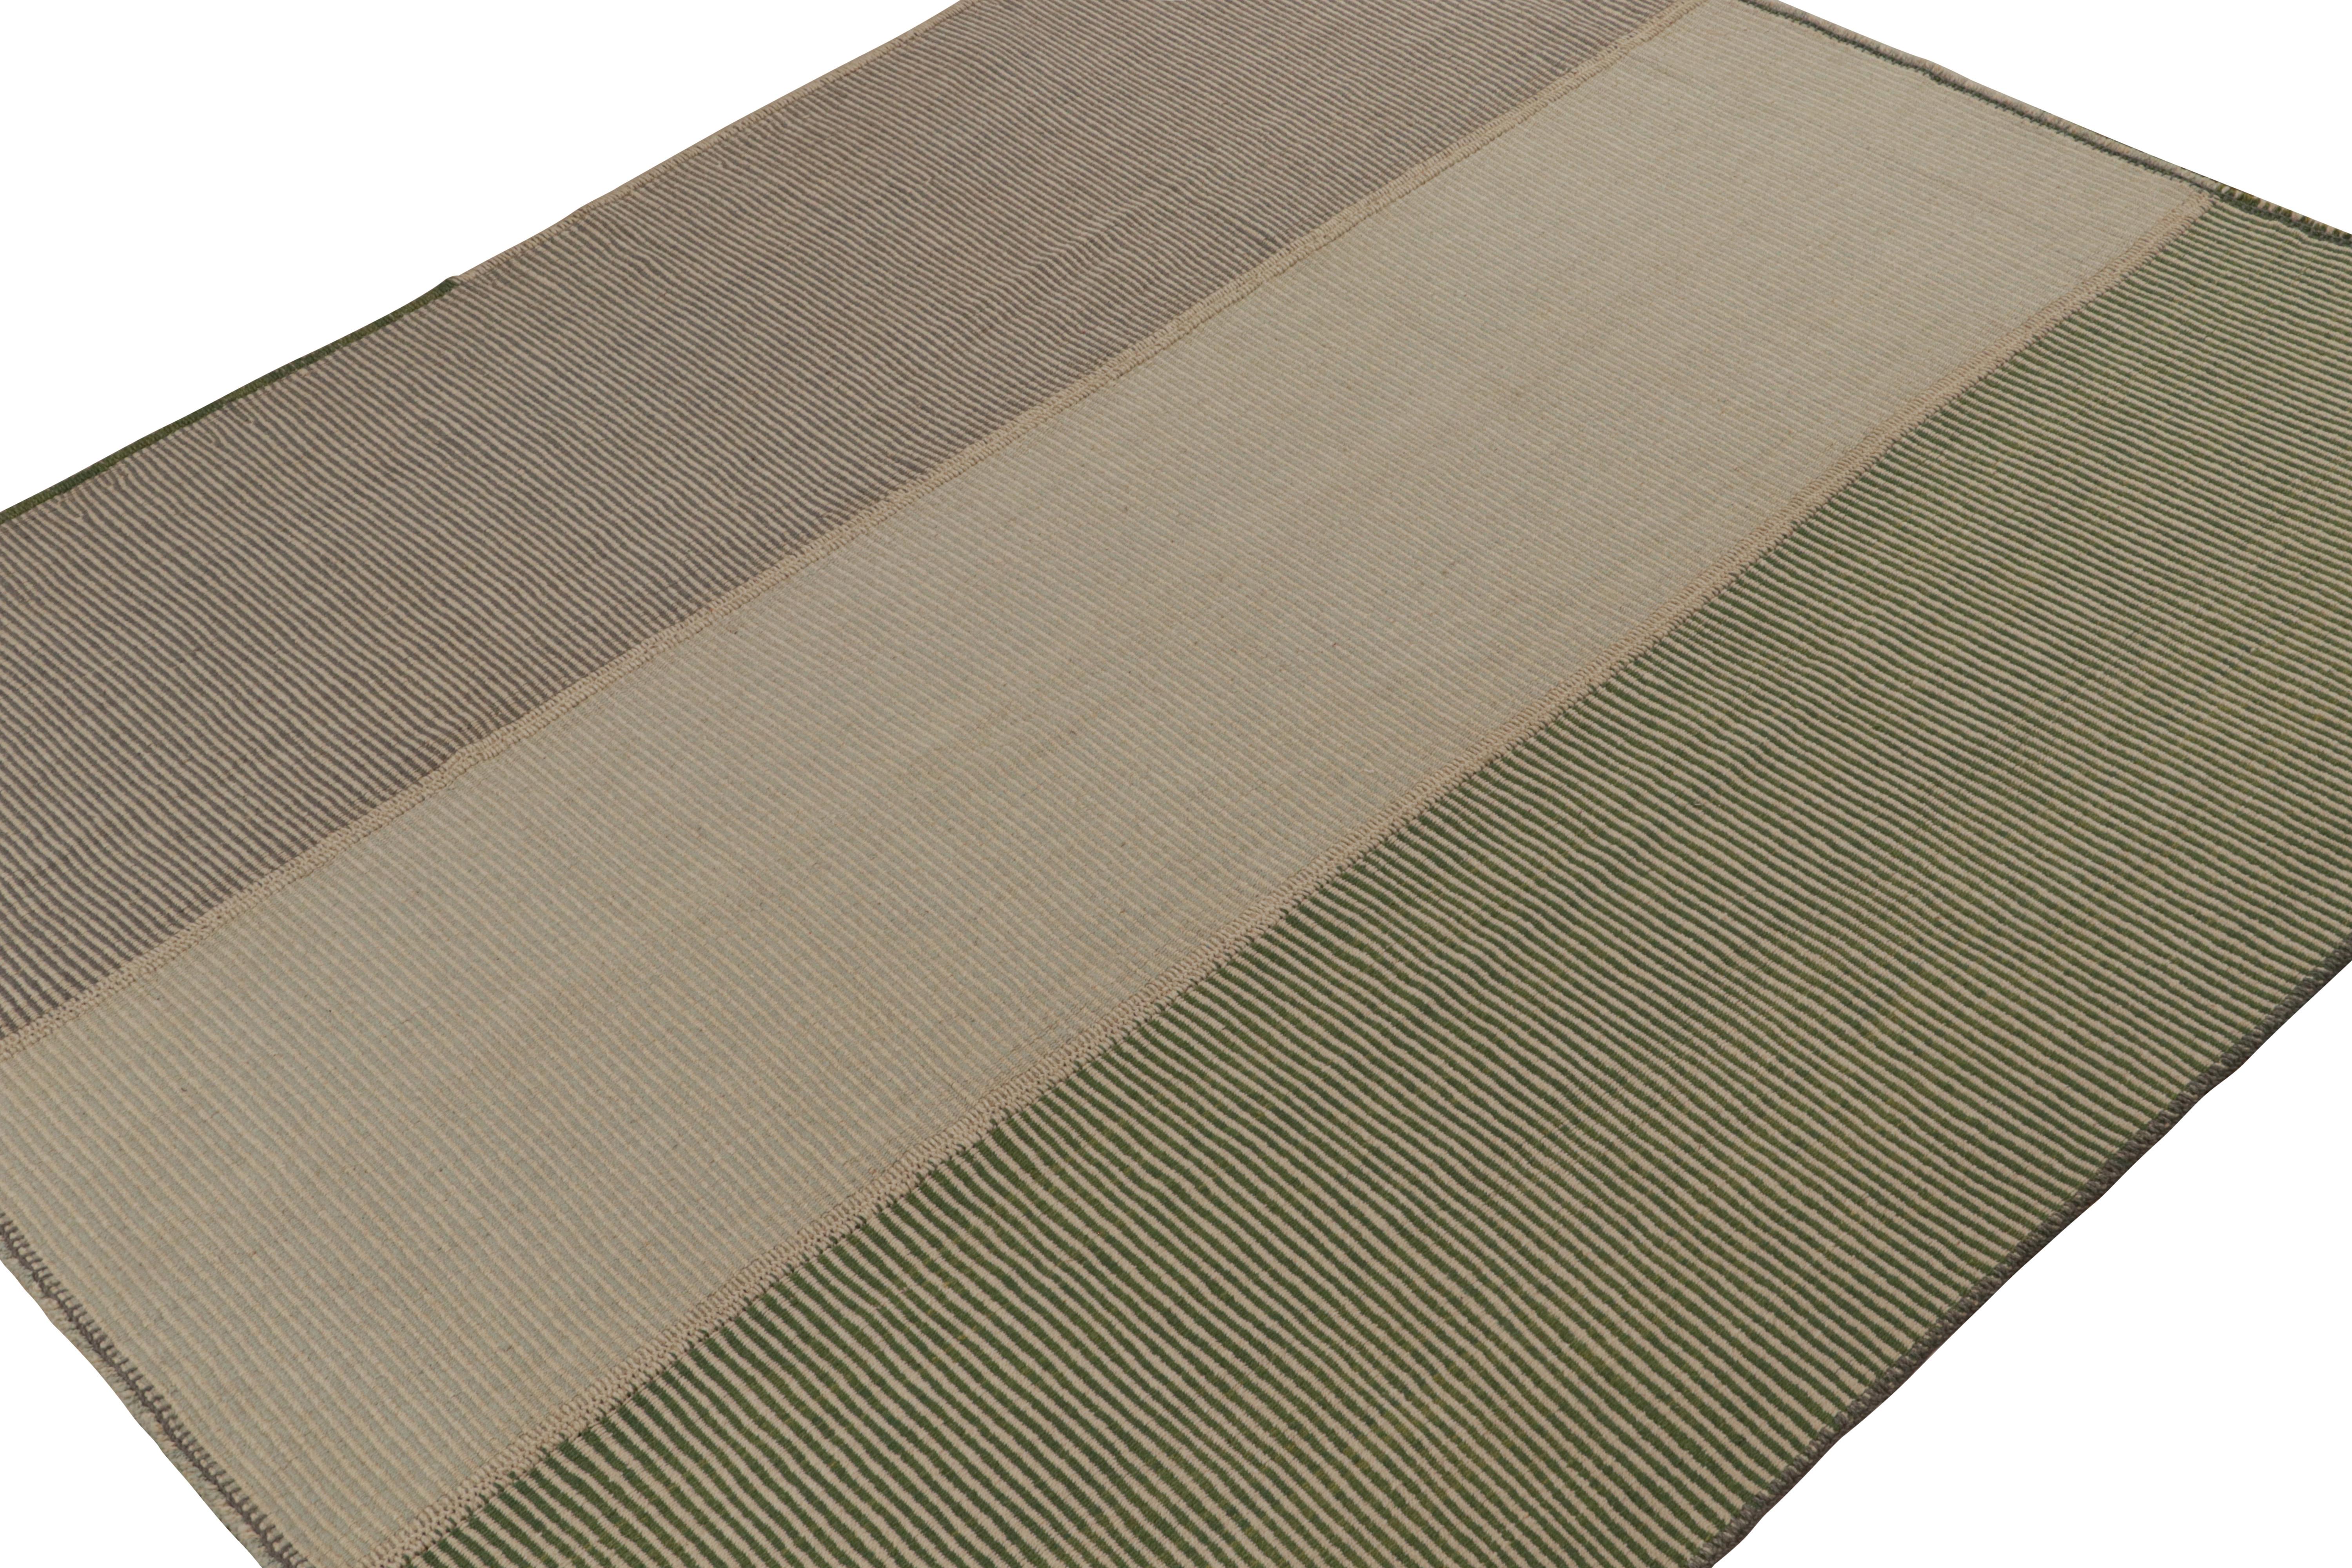 Handwoven in wool, a 9x10 Kilim from a bold new line of contemporary flatweaves by Rug & Kilim.

On the Design: 

Connoting a modern take on classic panel-weaving, our latest “Rez Kilim” enjoys beige, brown & green stripes. Keen eyes will admire how